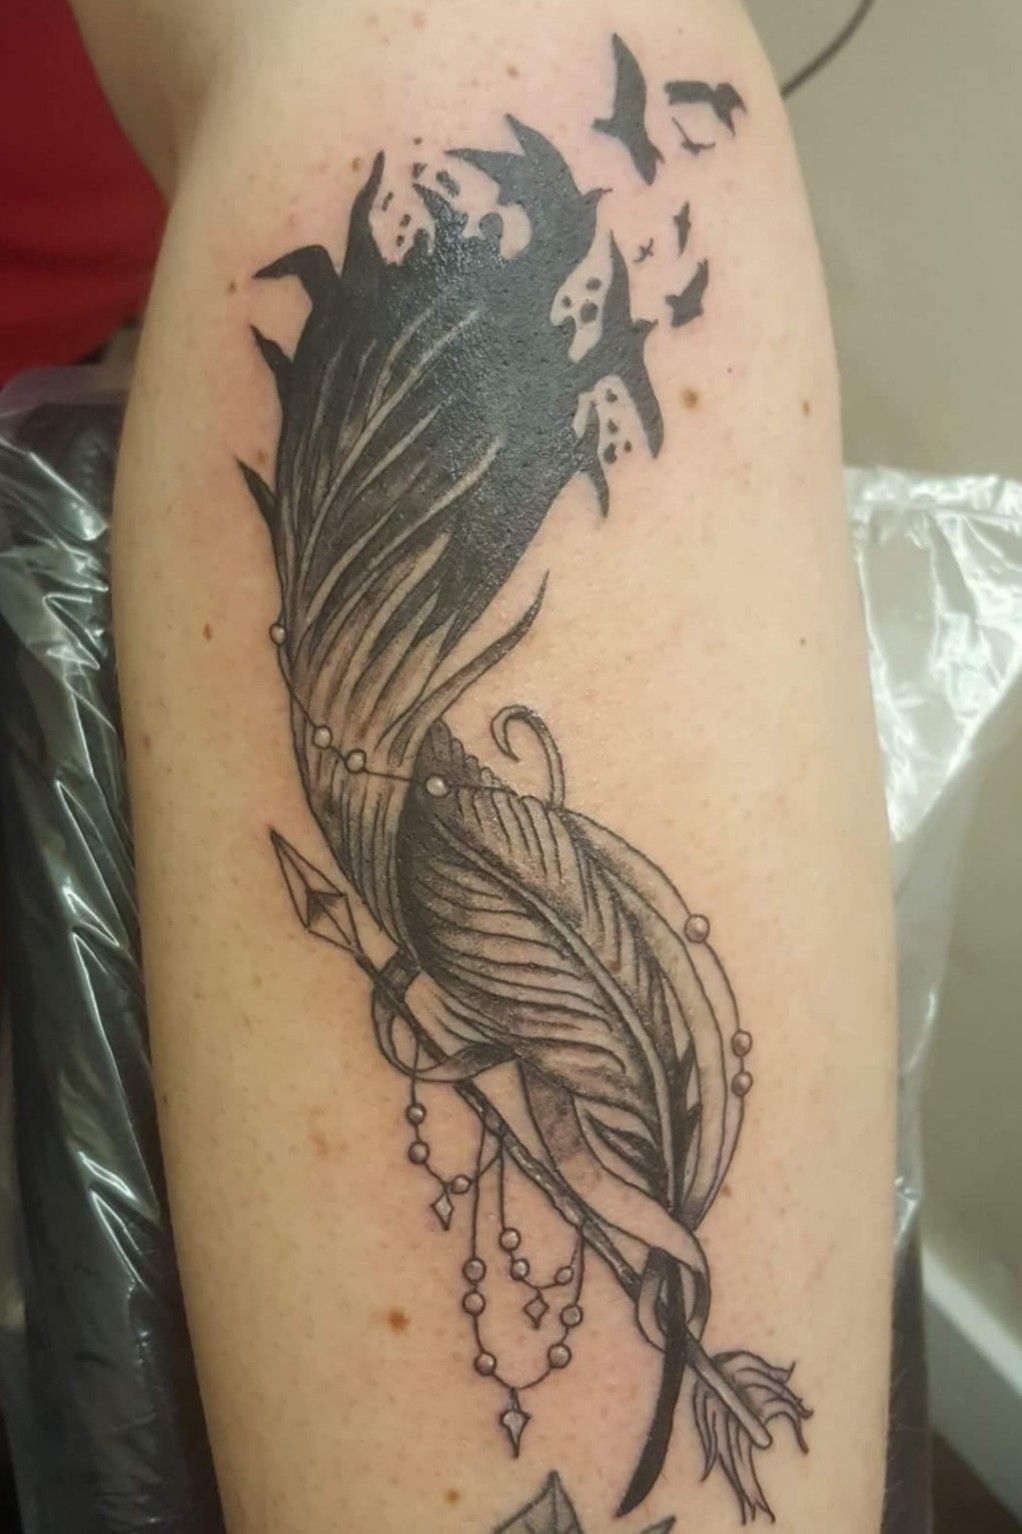 Feathers and birds  Steemit  Feather with birds tattoo Feather tattoo  design Feather tattoos